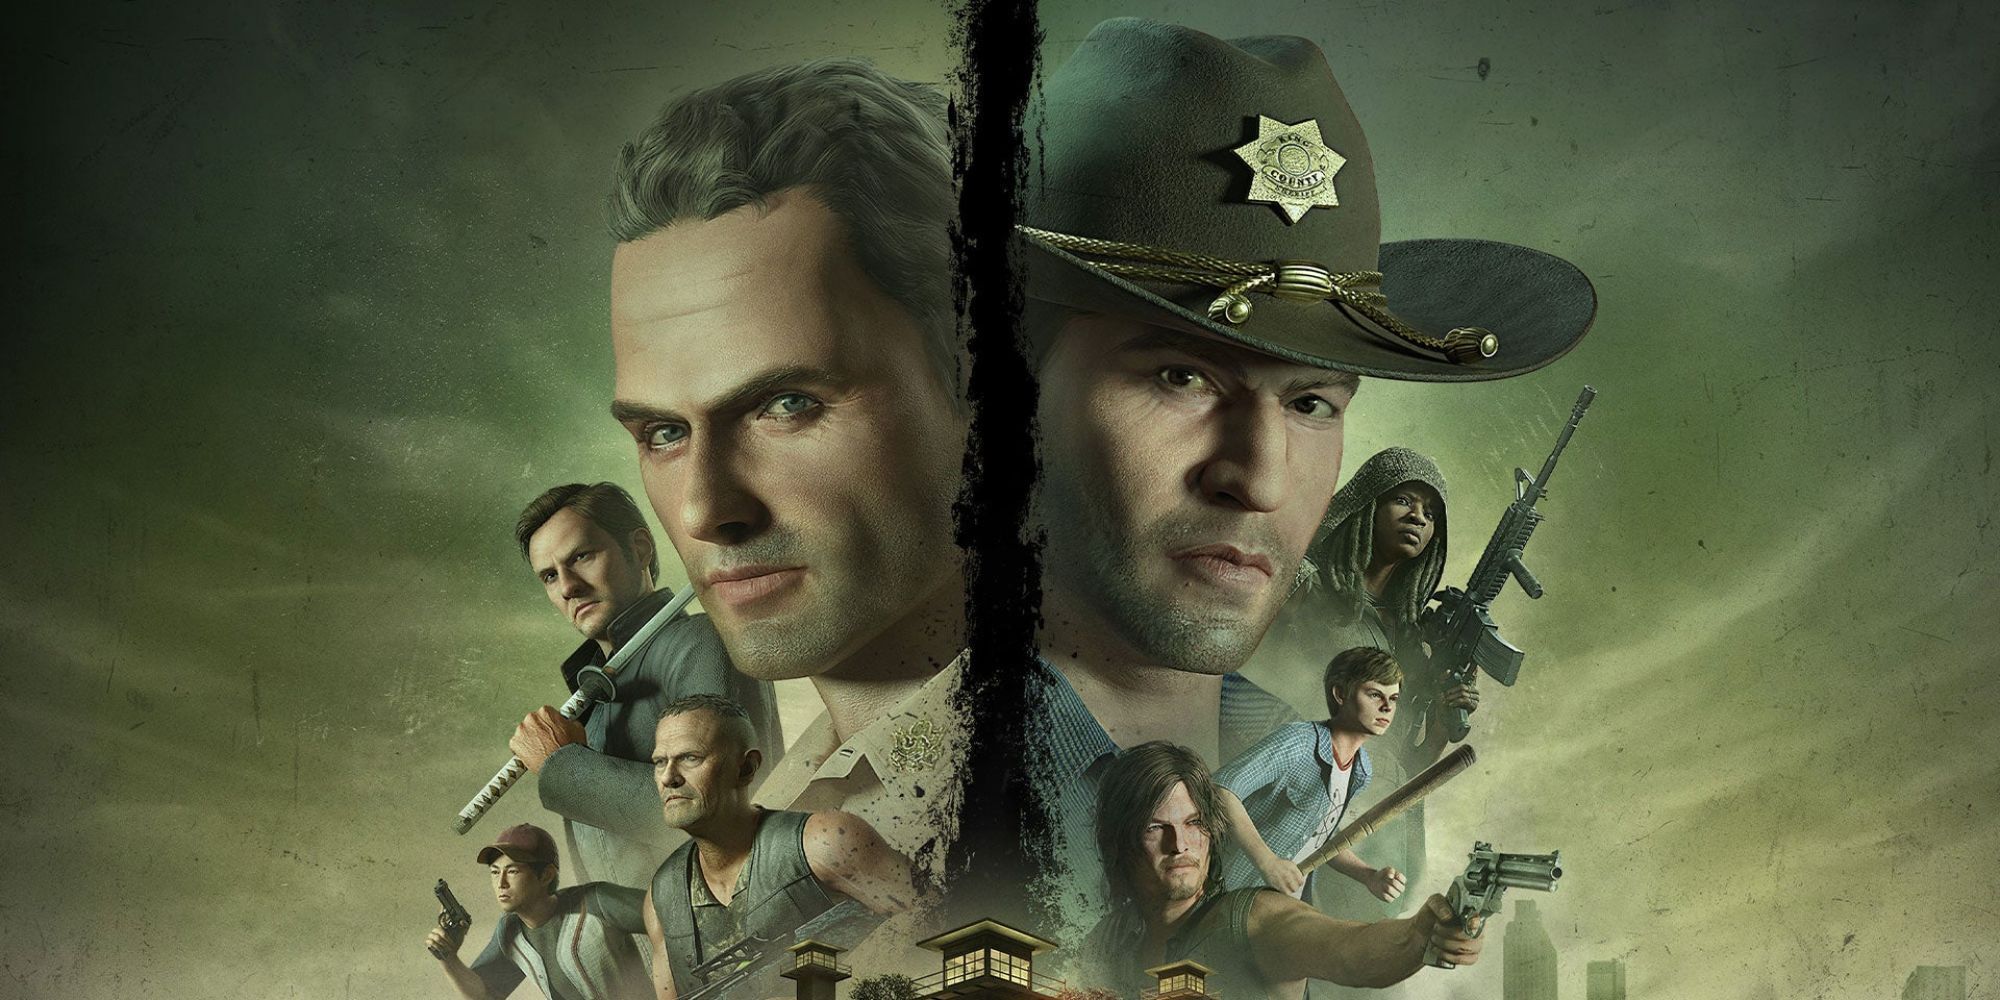 The Walking Dead: Destinies key art showing Rick and Shane with other side characters